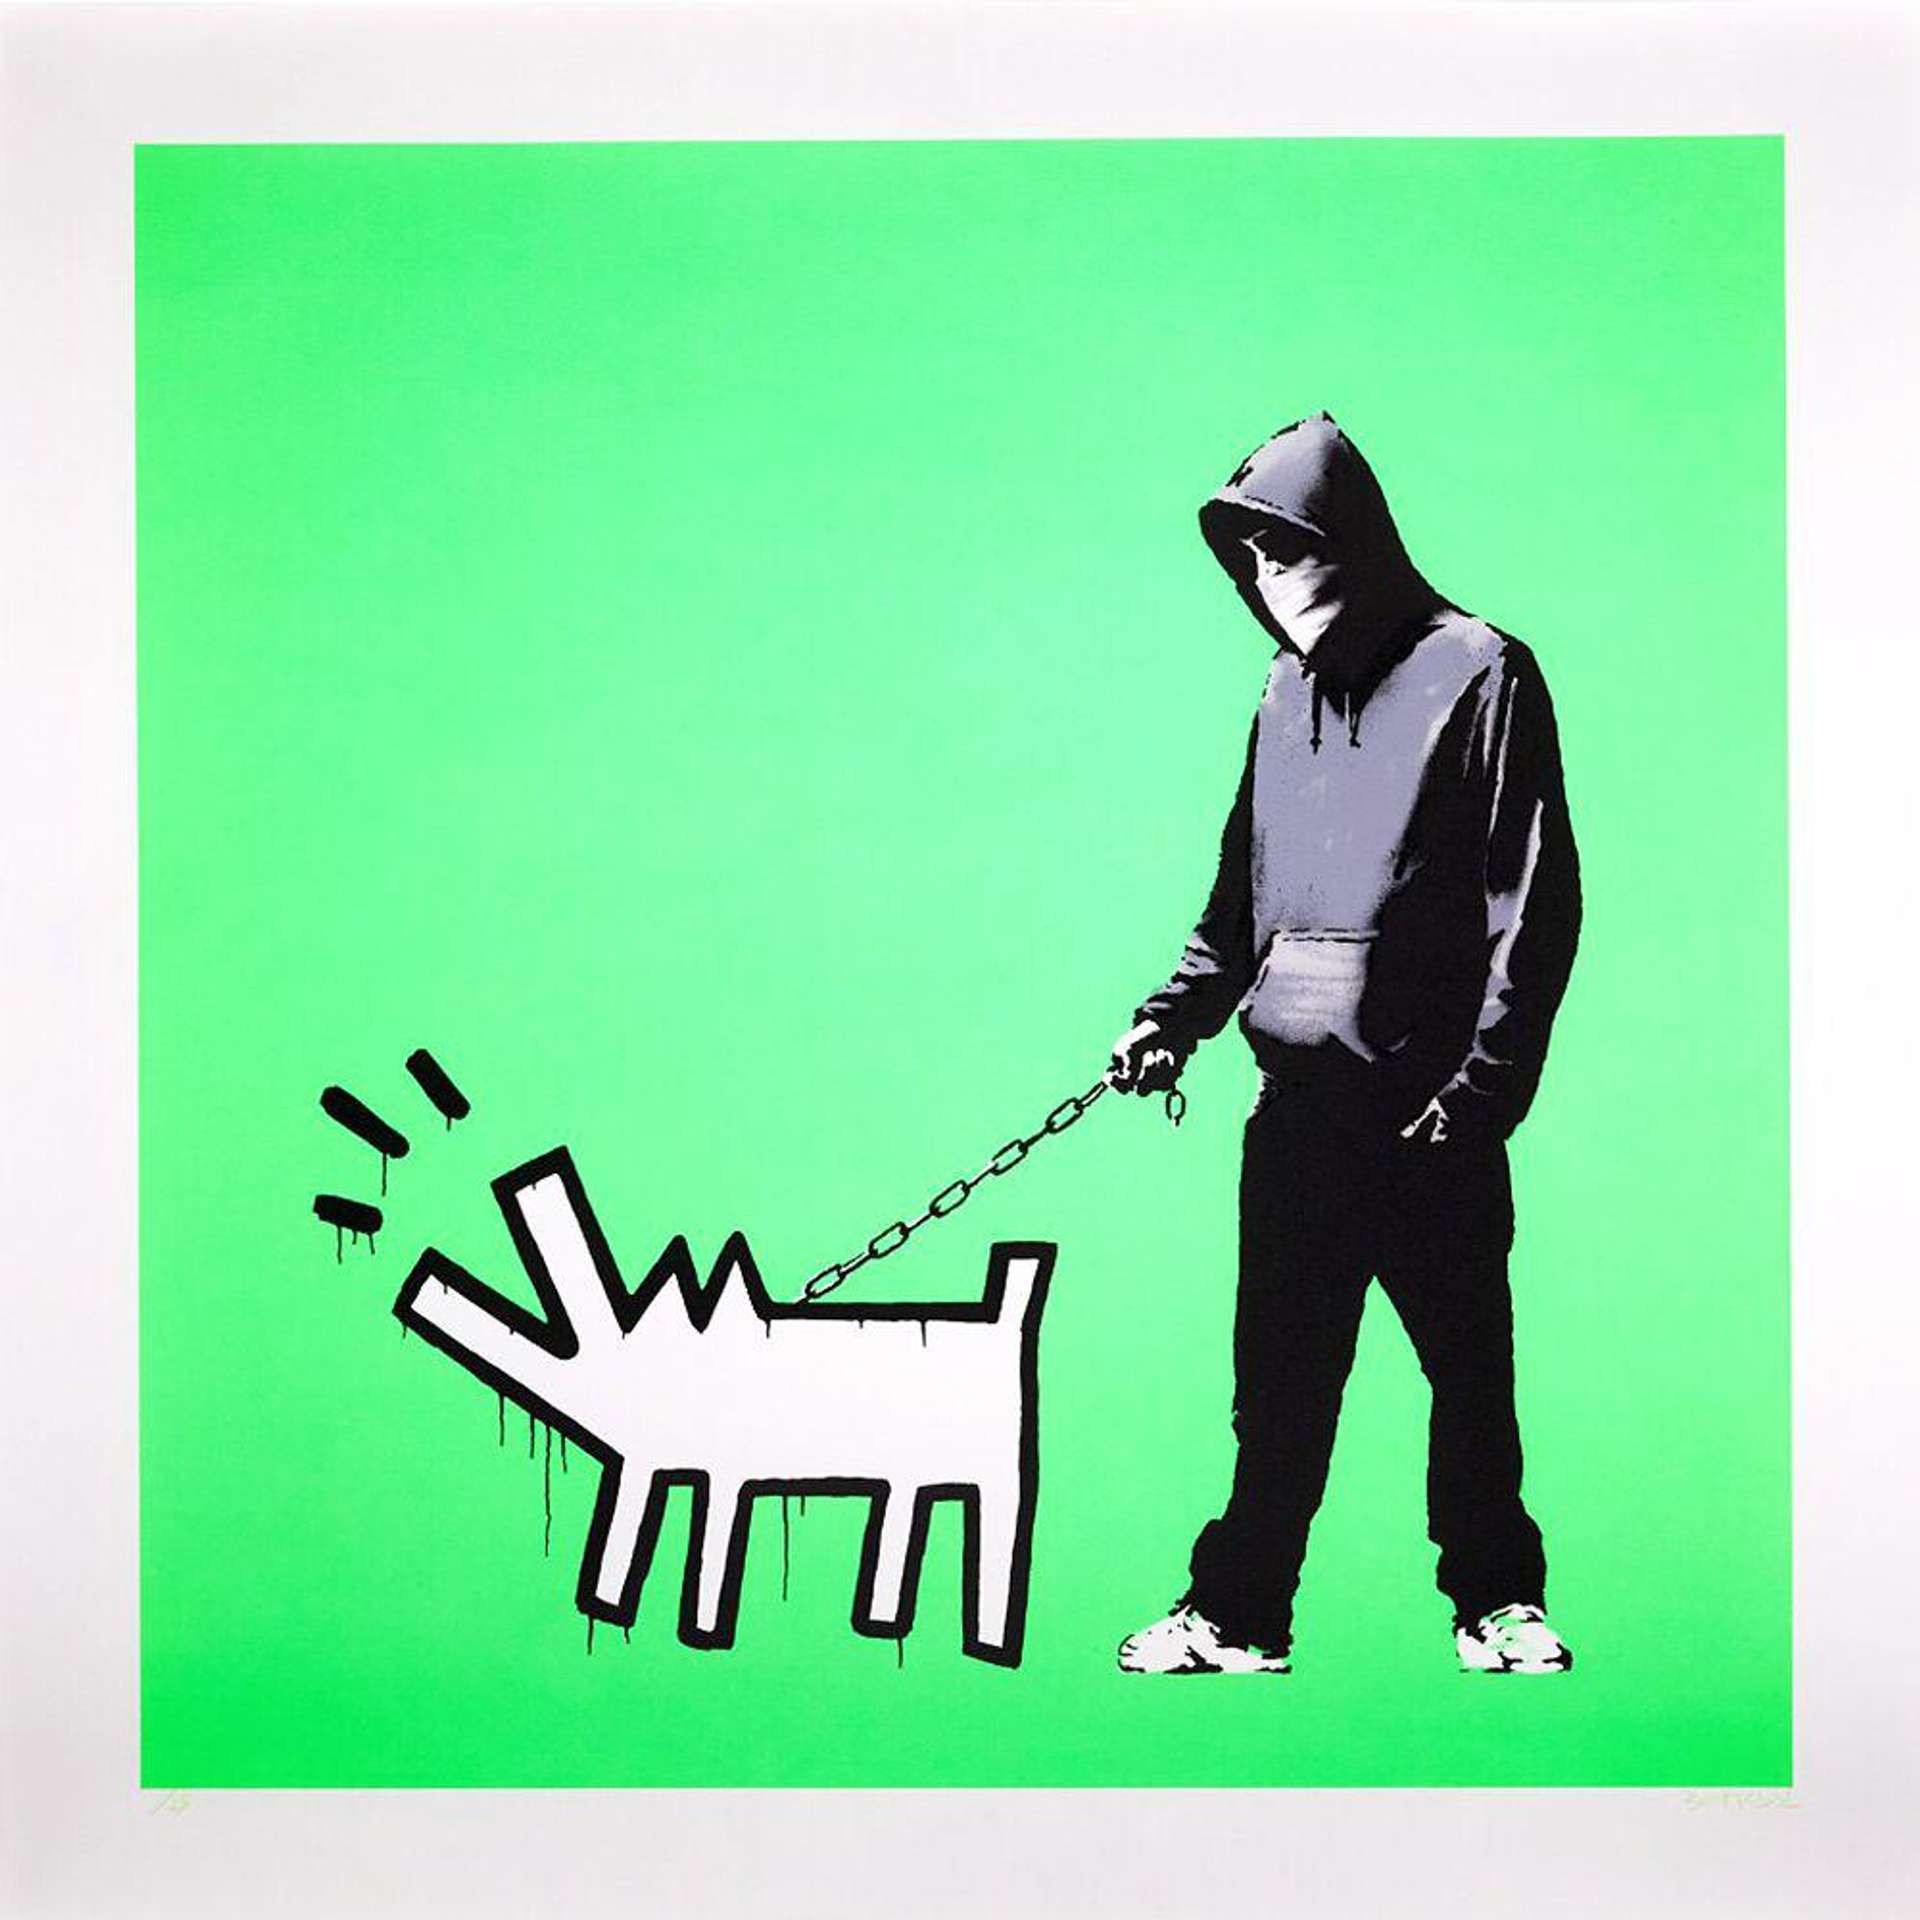 A screenprint by Banksy which homages Keith Haring's iconic barking dog, depicted here held by a hooded man against a neon green background.